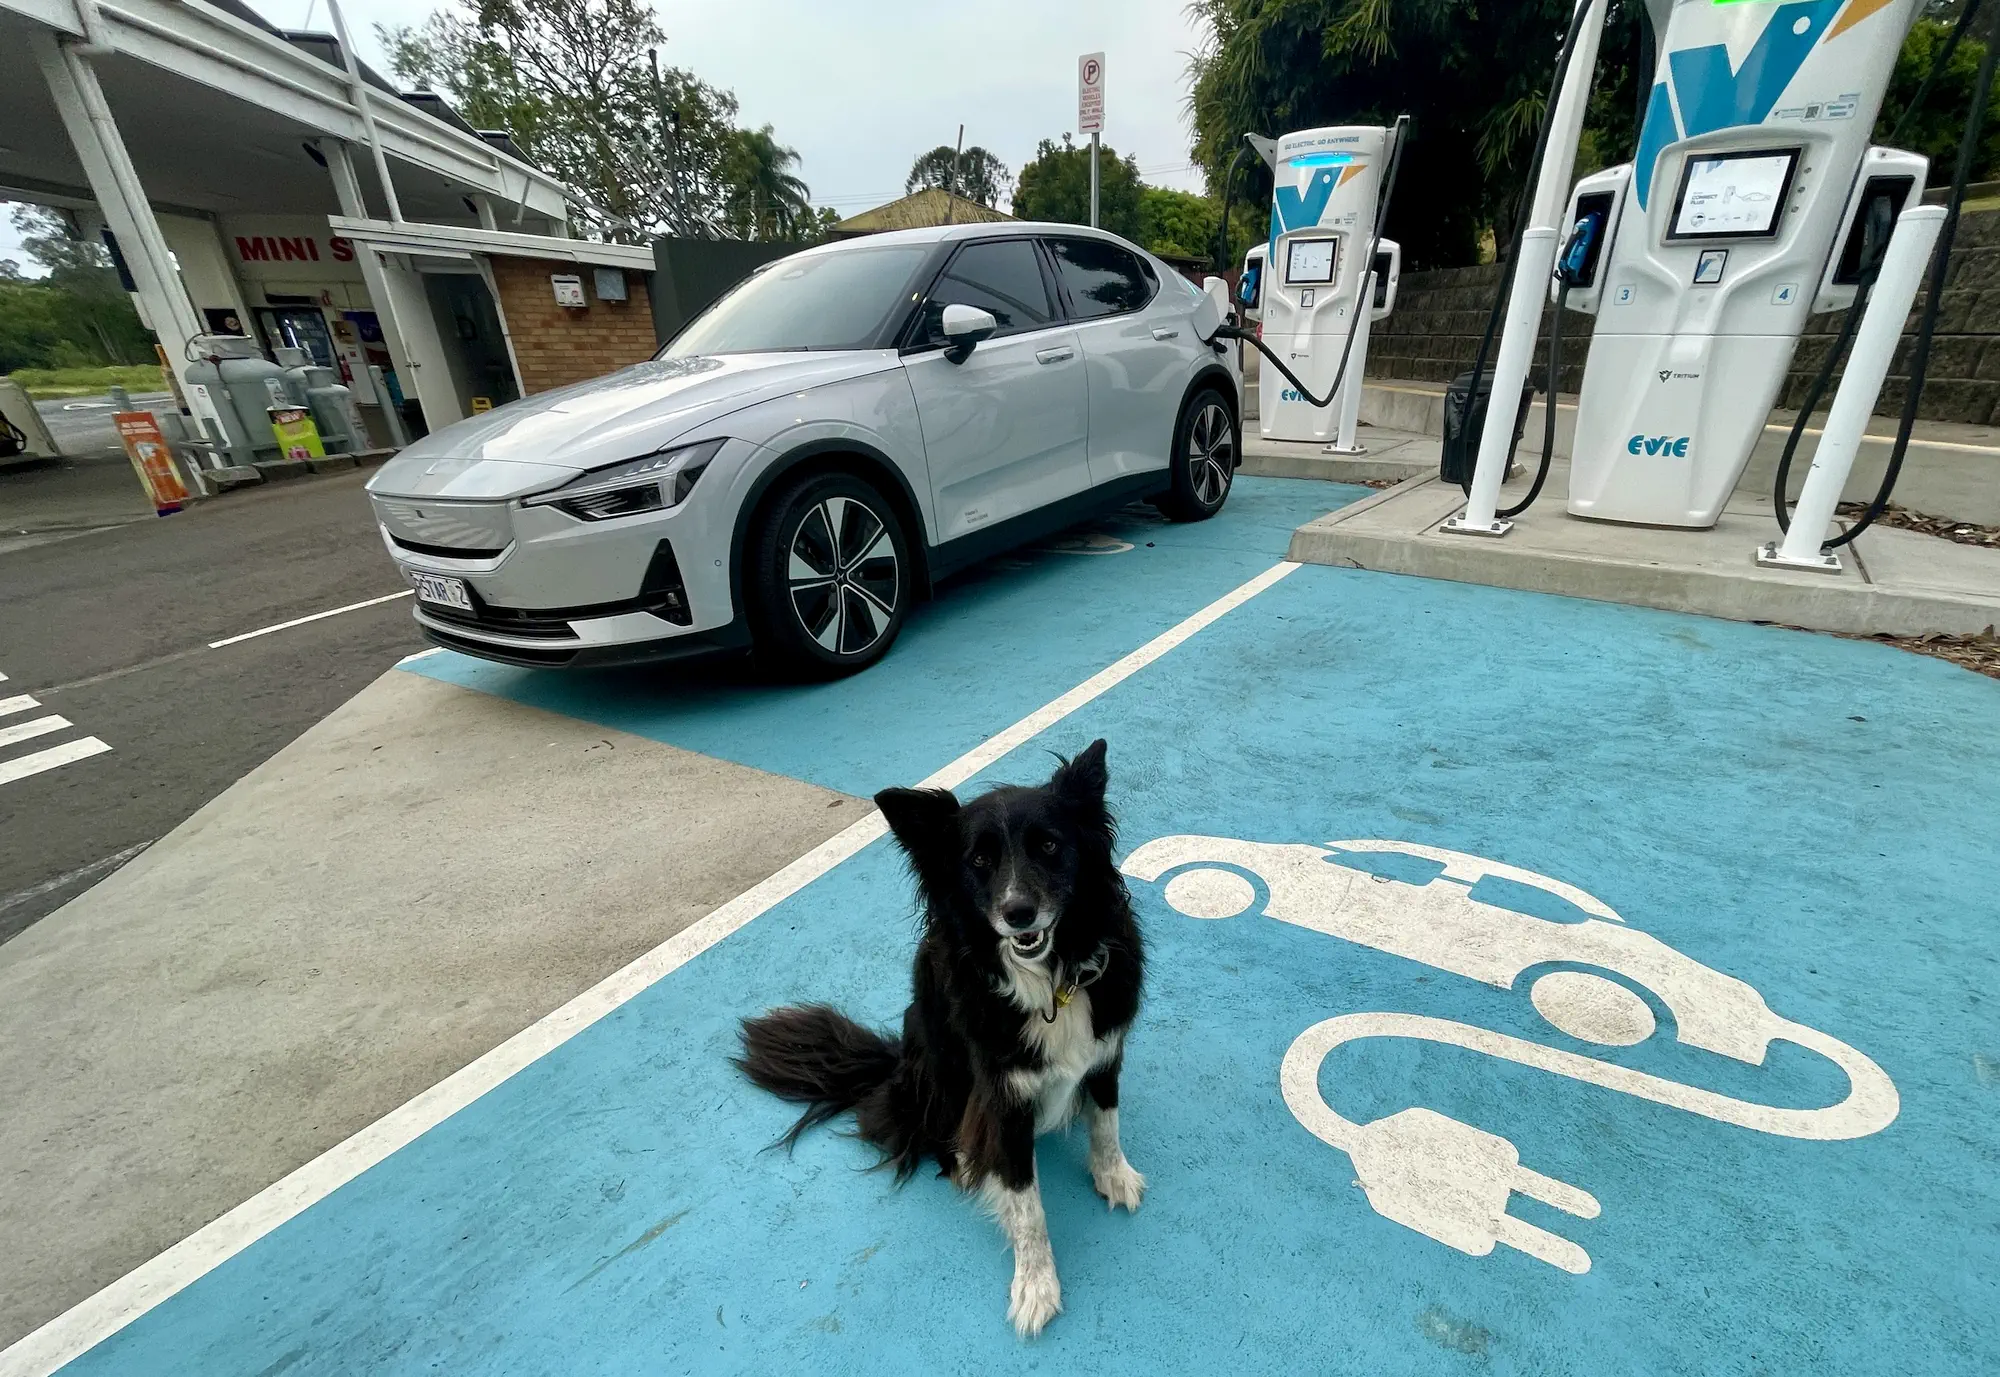 Discounted 10-15% off Evie Public Charging Vouchers – are they worth it?